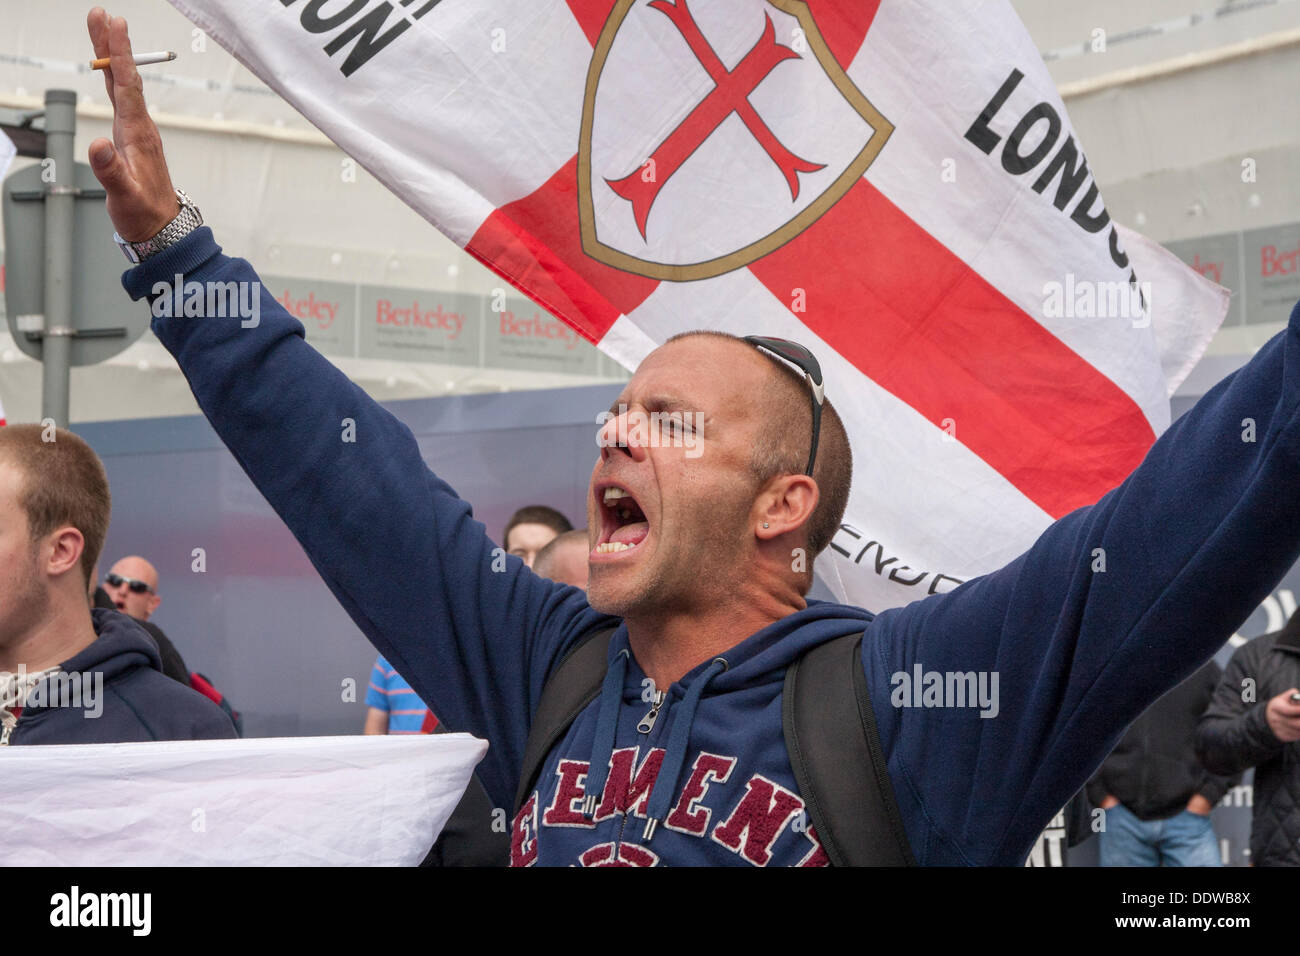 London, UK. 07th Sep, 2013. An EDL supporter chants slogans as several hundred English Defence League supporters marched over Tower Bridge to a short rally outside Aldgate station on the edge of the borough of Tower Hamlets. Credit:  Paul Davey/Alamy Live News Stock Photo